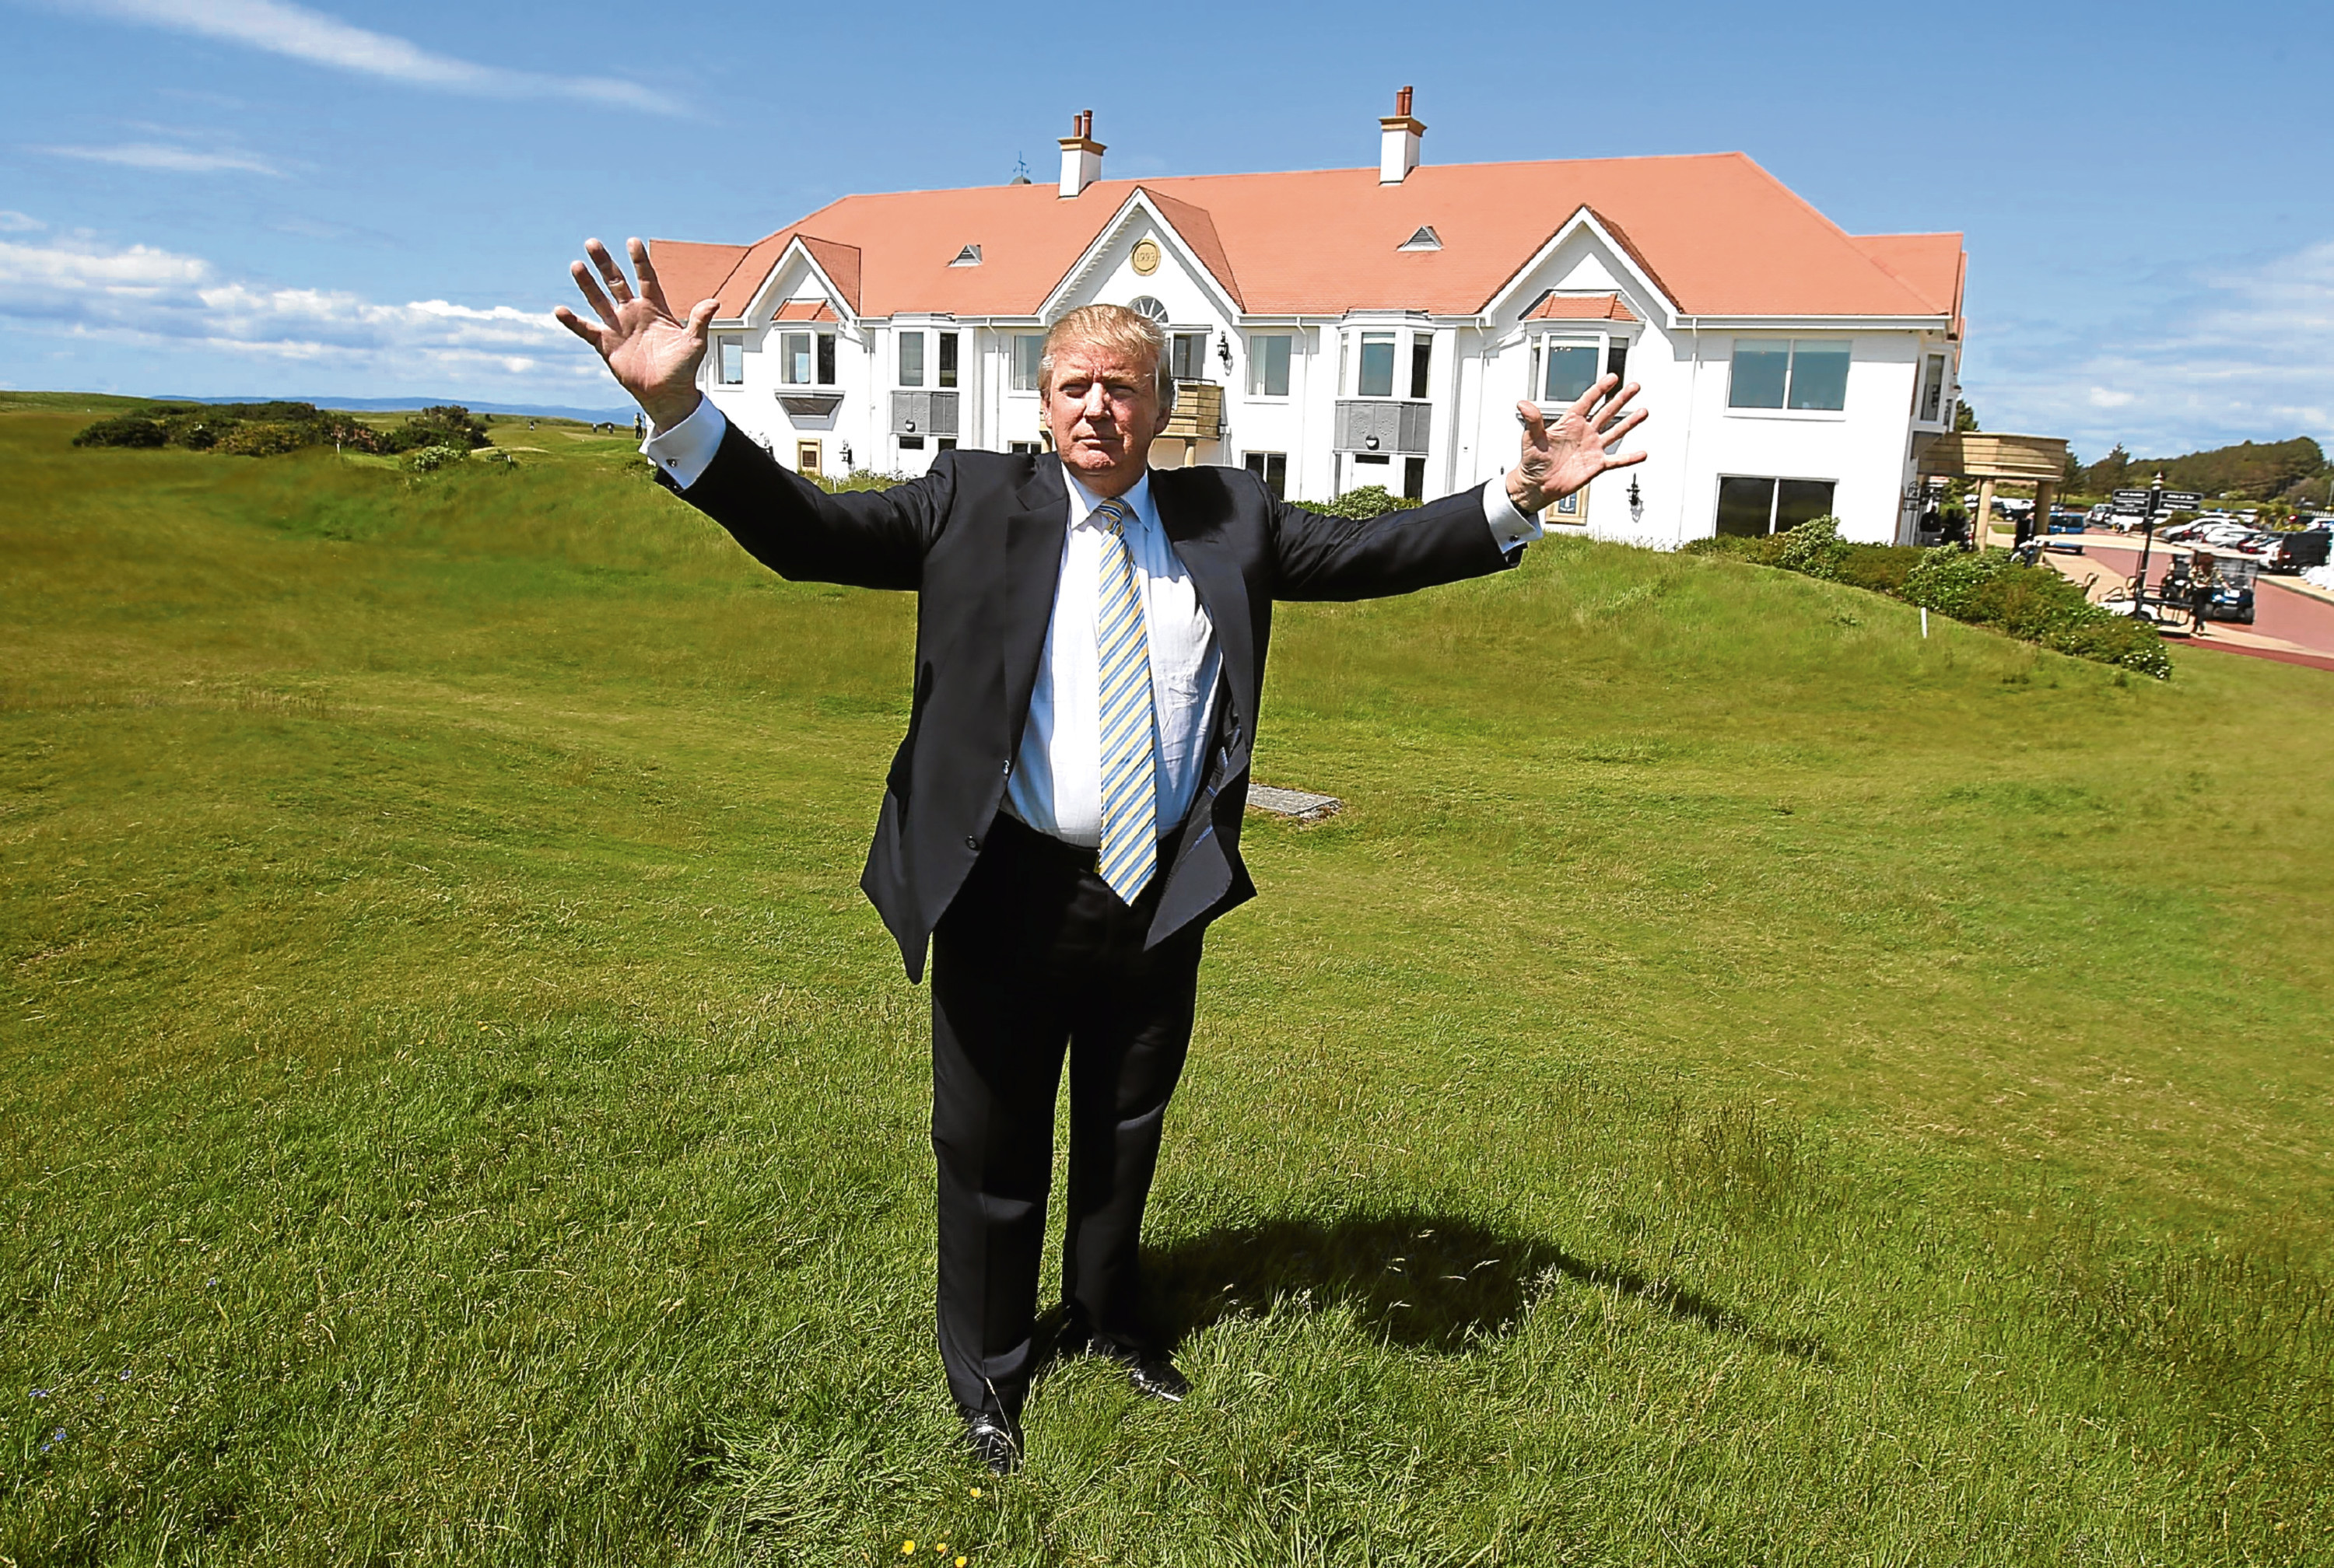 Donald Trump poses for a picture after unveiling the multi-million pound refurbishment of the Trump Turnberry clubhouse at his golf course in south Ayrshire.